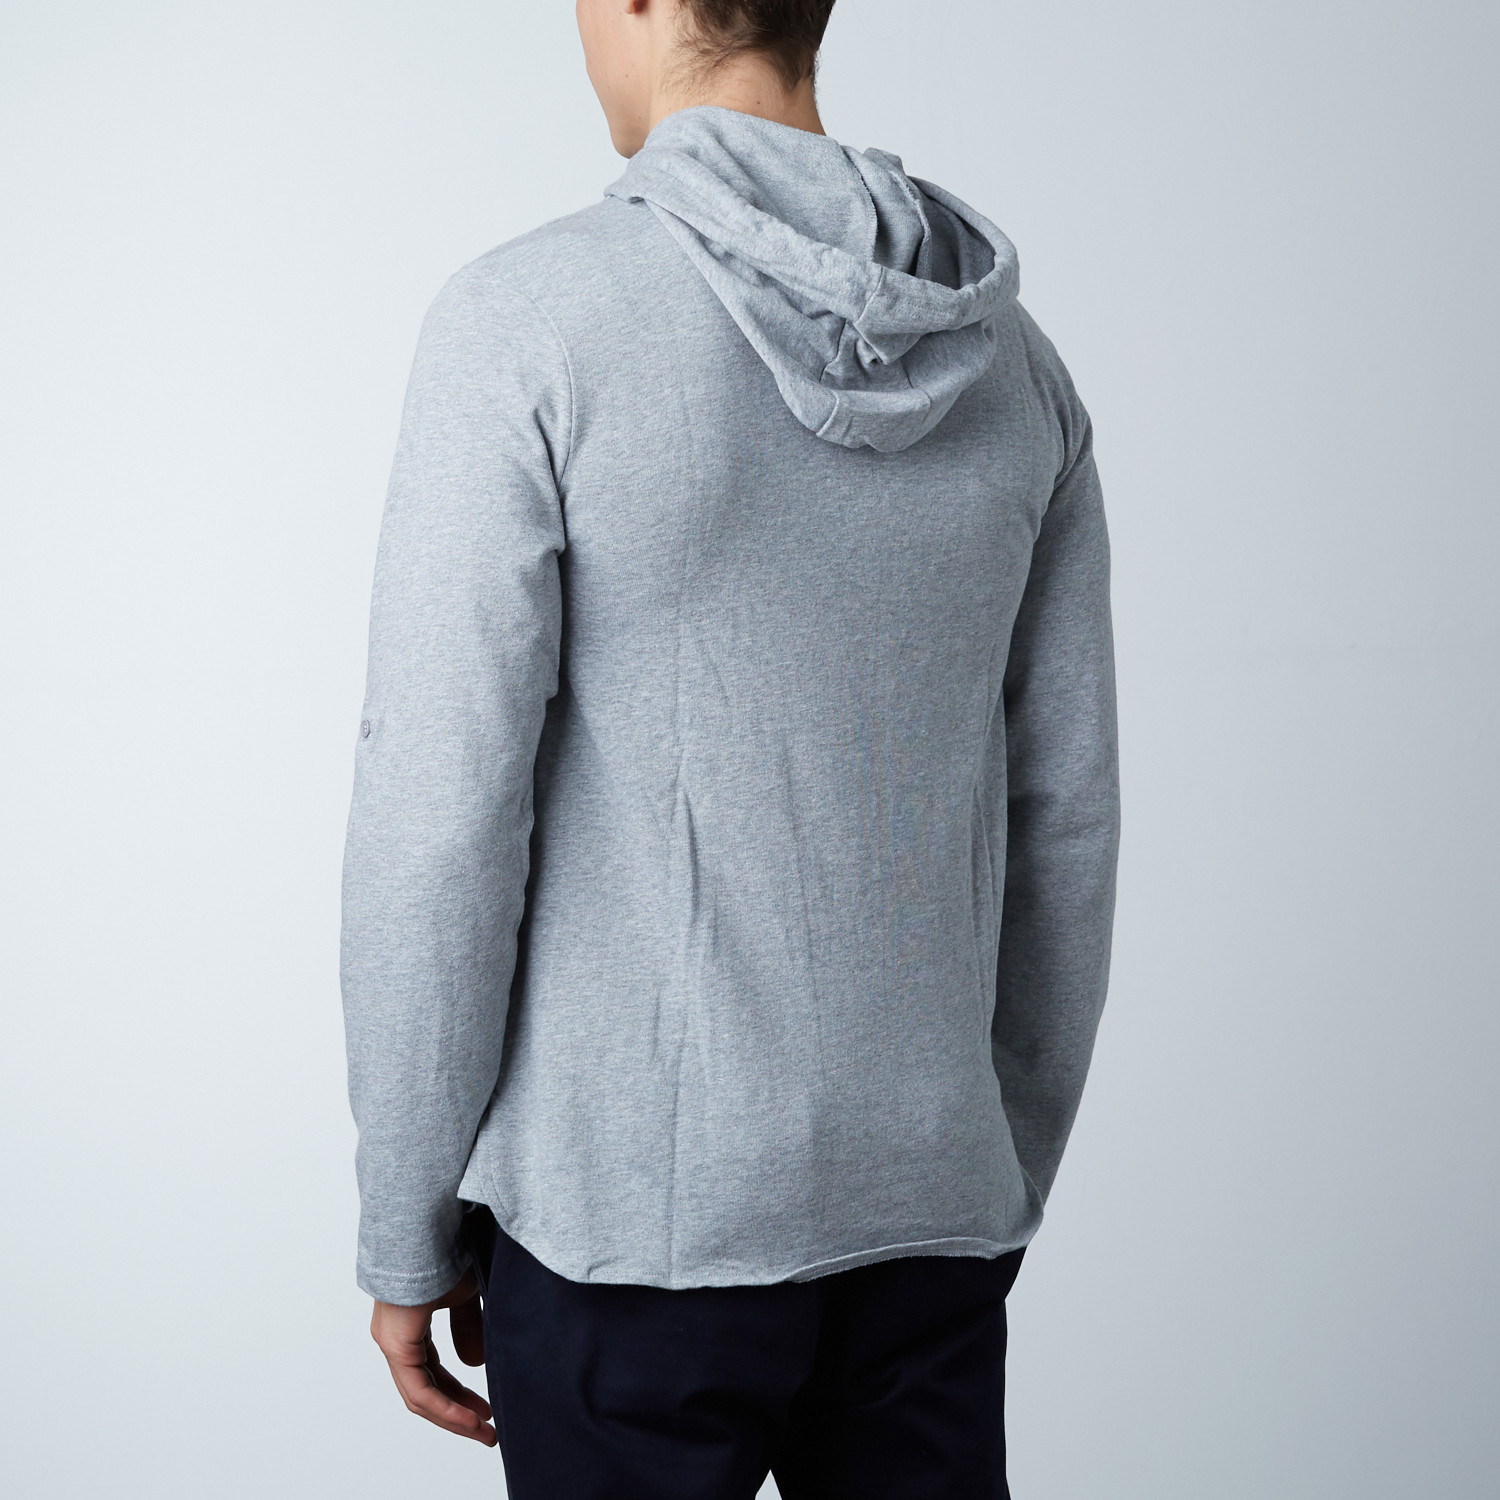 Roll Up Sleeve Hoodie // Gray (XS) - Standard Issue NYC - Touch of Modern